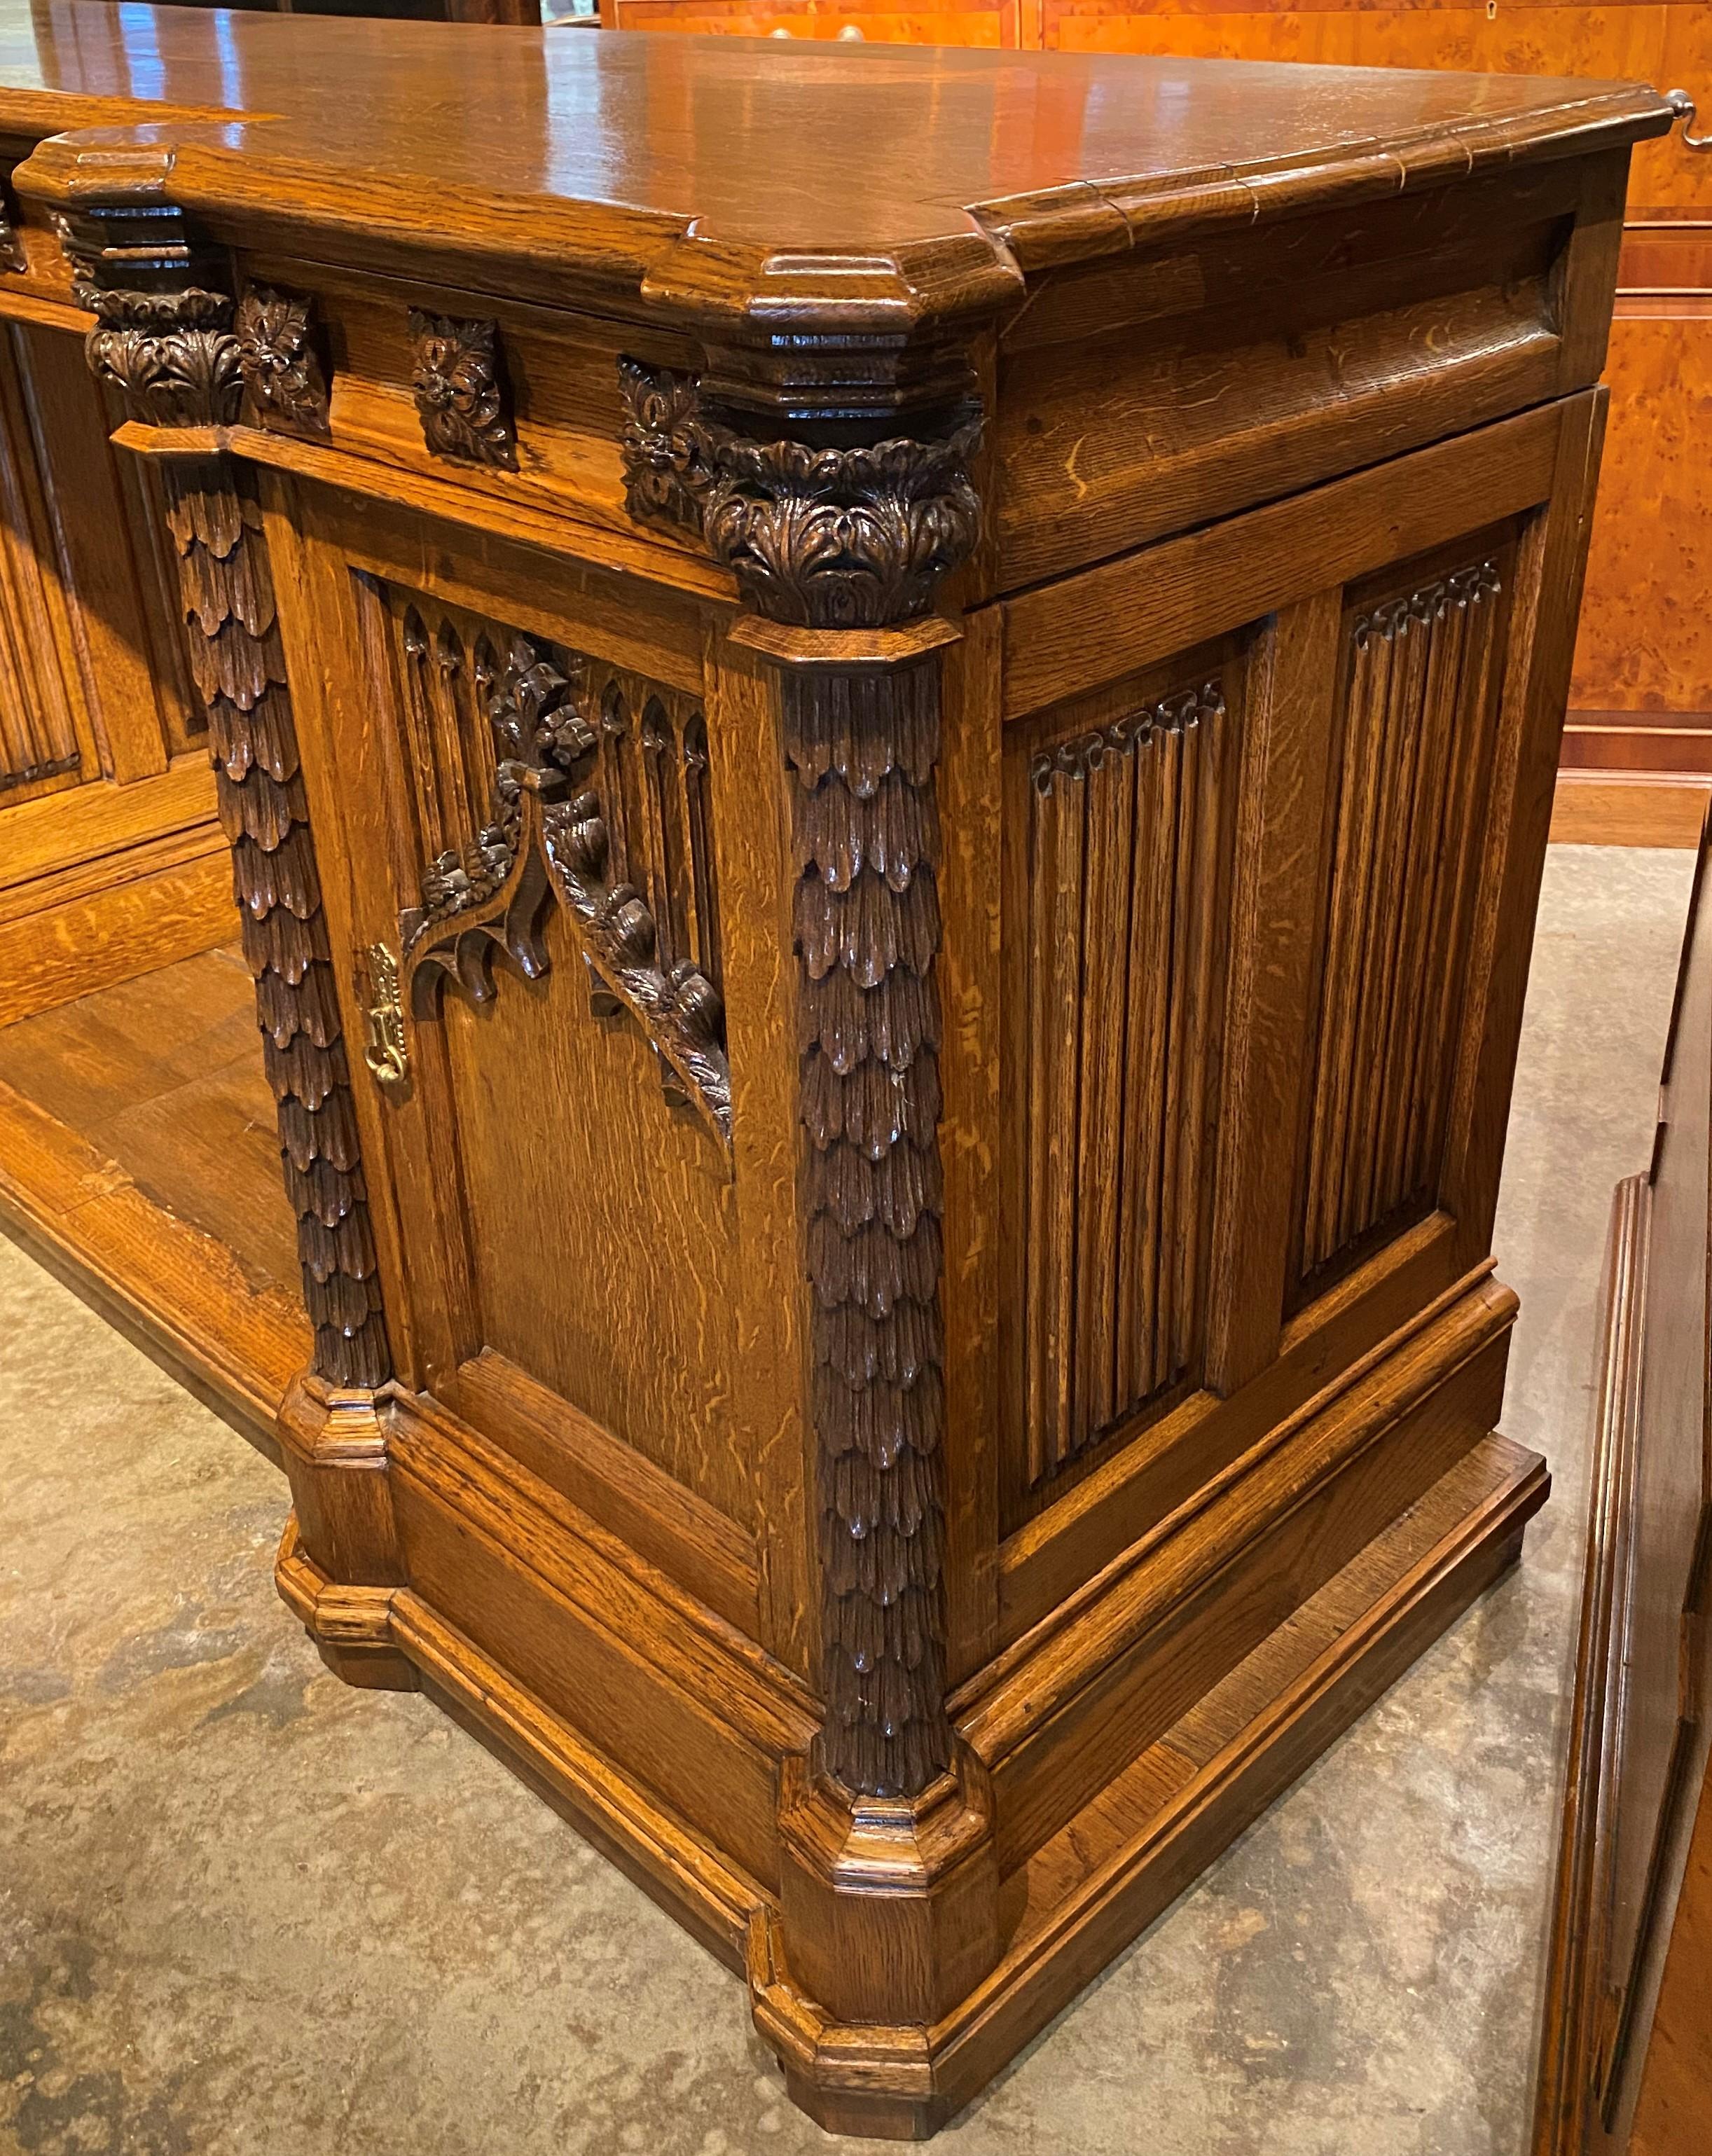 Gothic Revival Quarter Sawn Oak Sideboard with Exceptional Carving For Sale 3